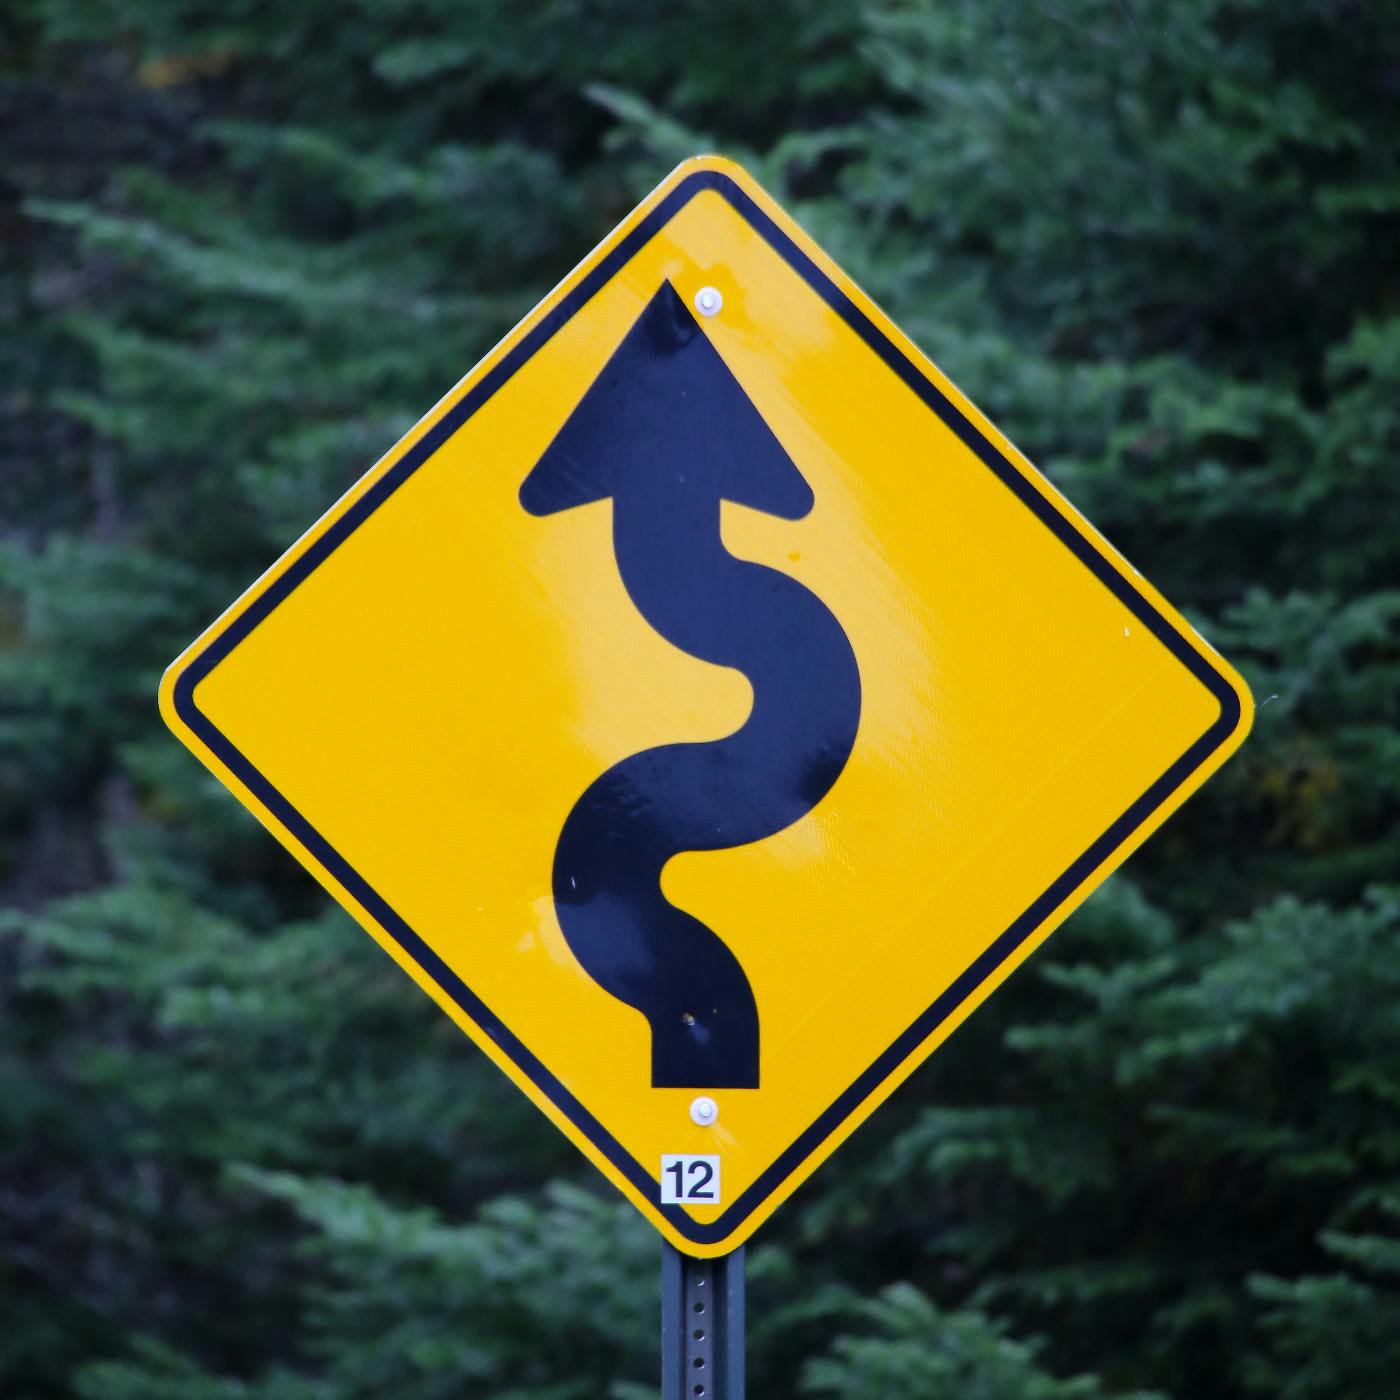 A yellow sign with a curvy arrow indicating a winding road